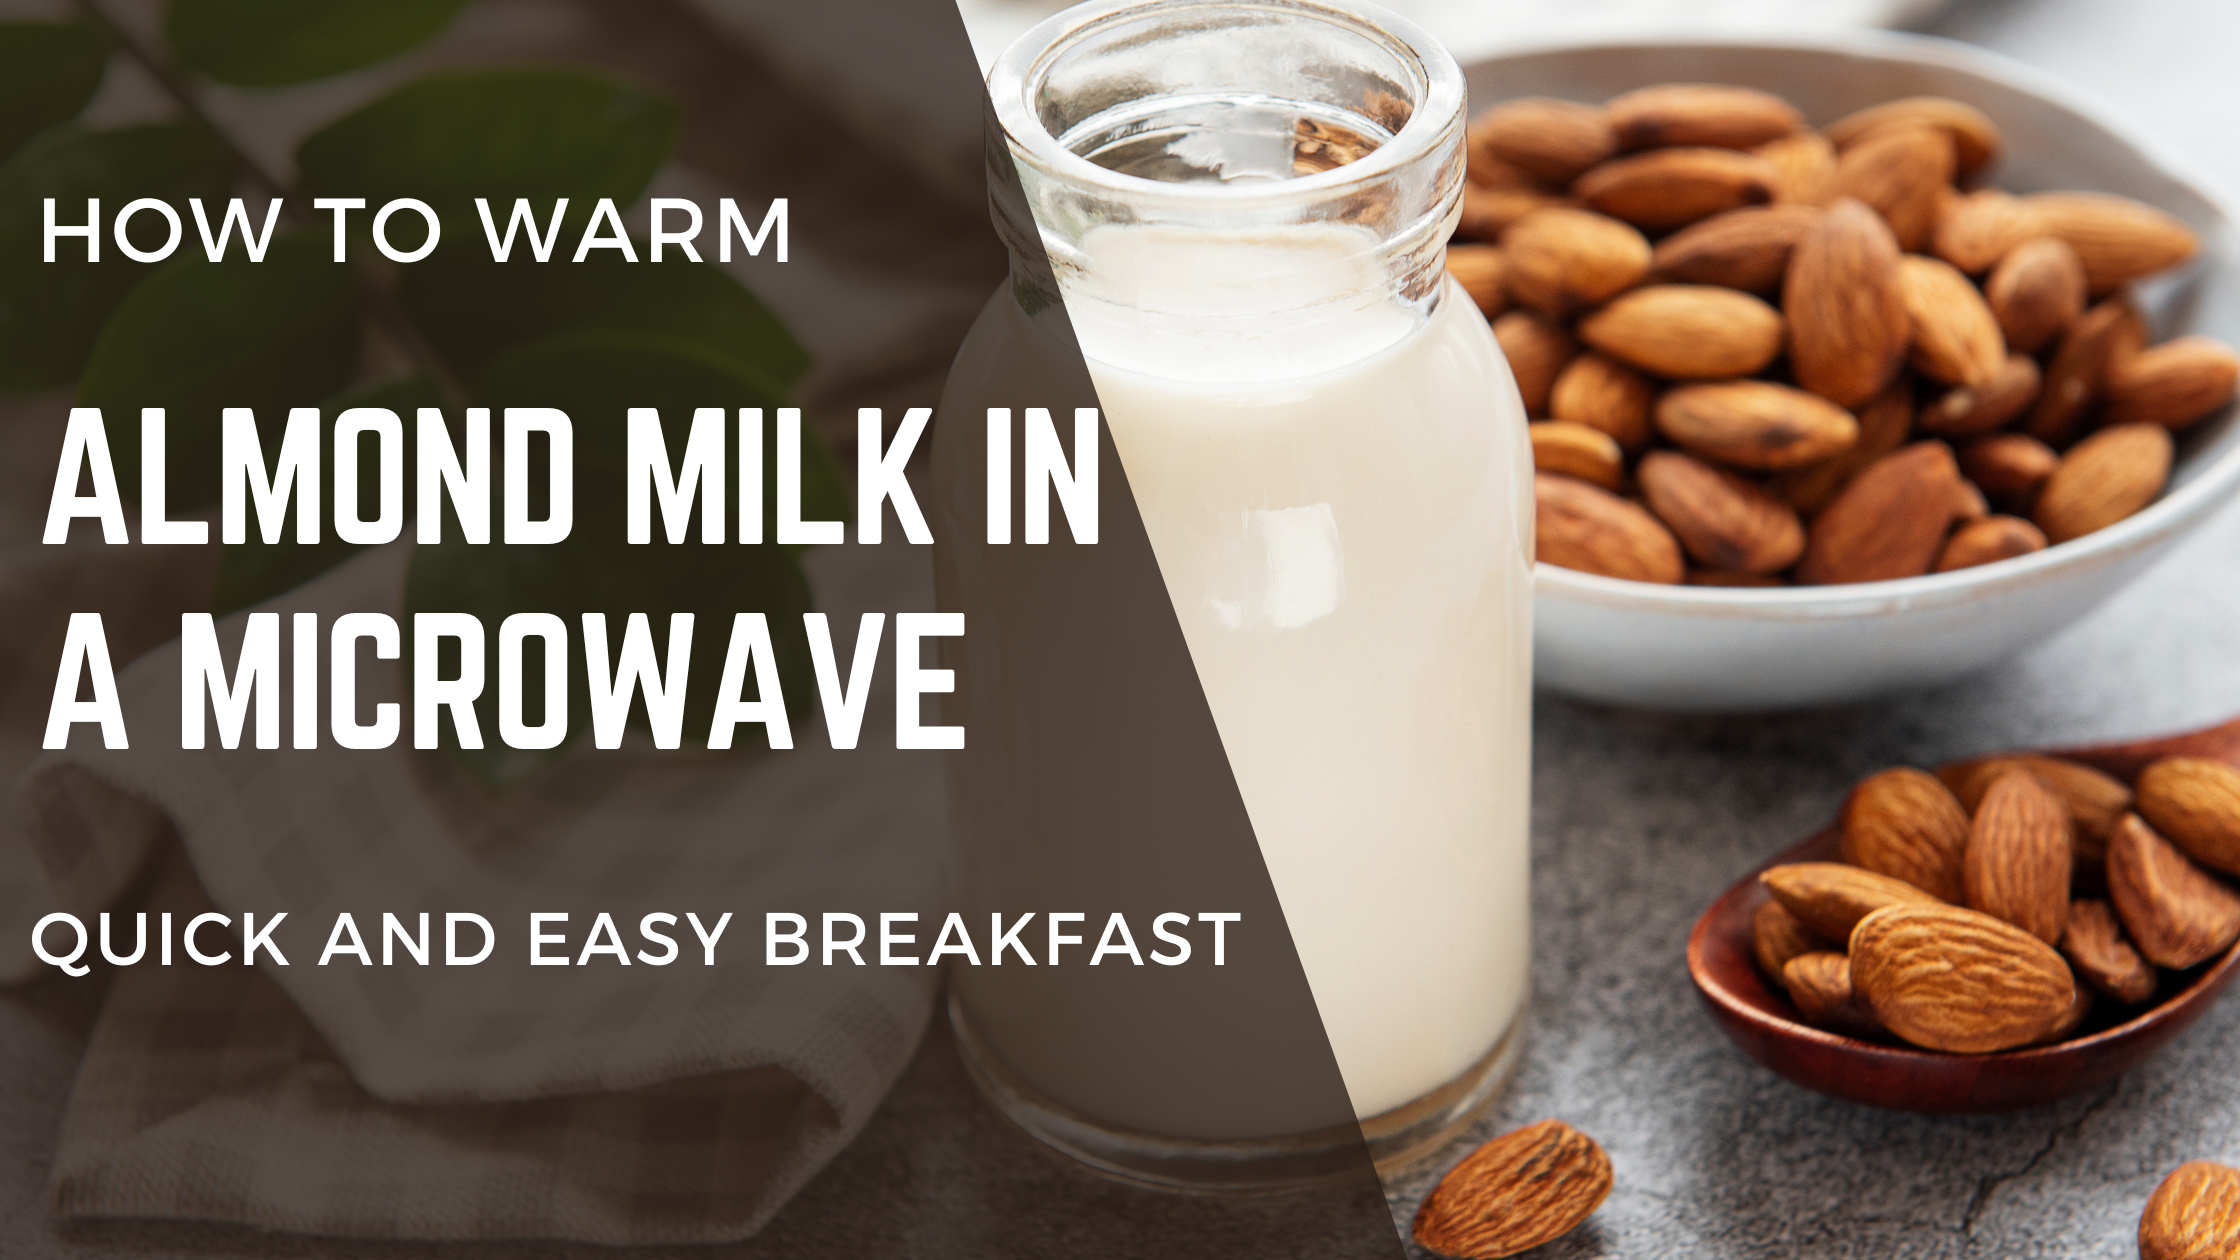 How to warm almond milk in microwave